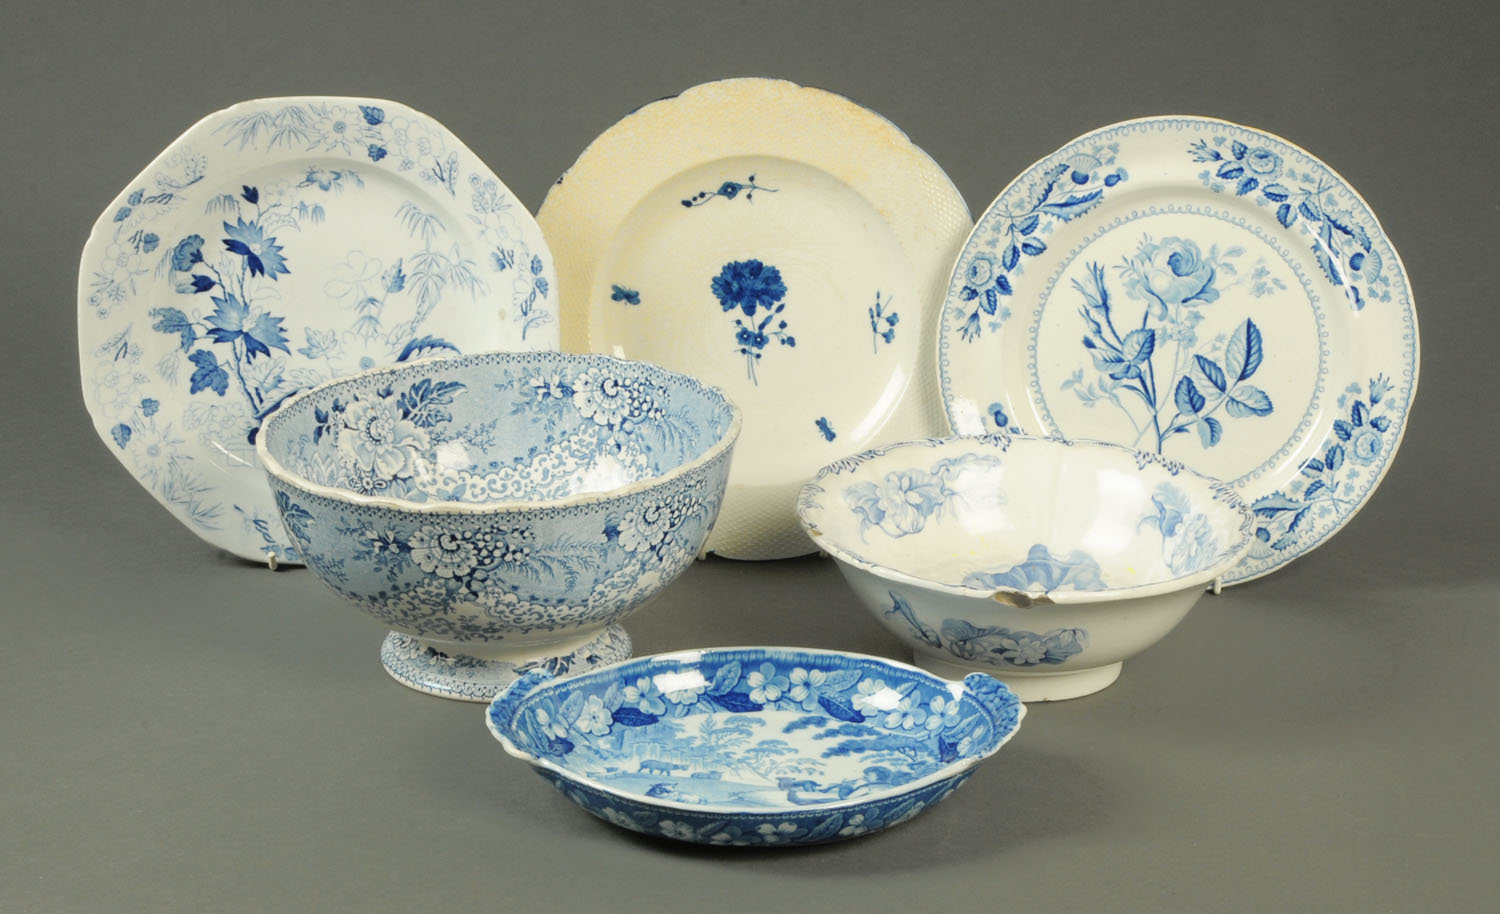 A 19th century Davenport blue and white transfer printed foliate patterned fruit bowl, diameter 23.